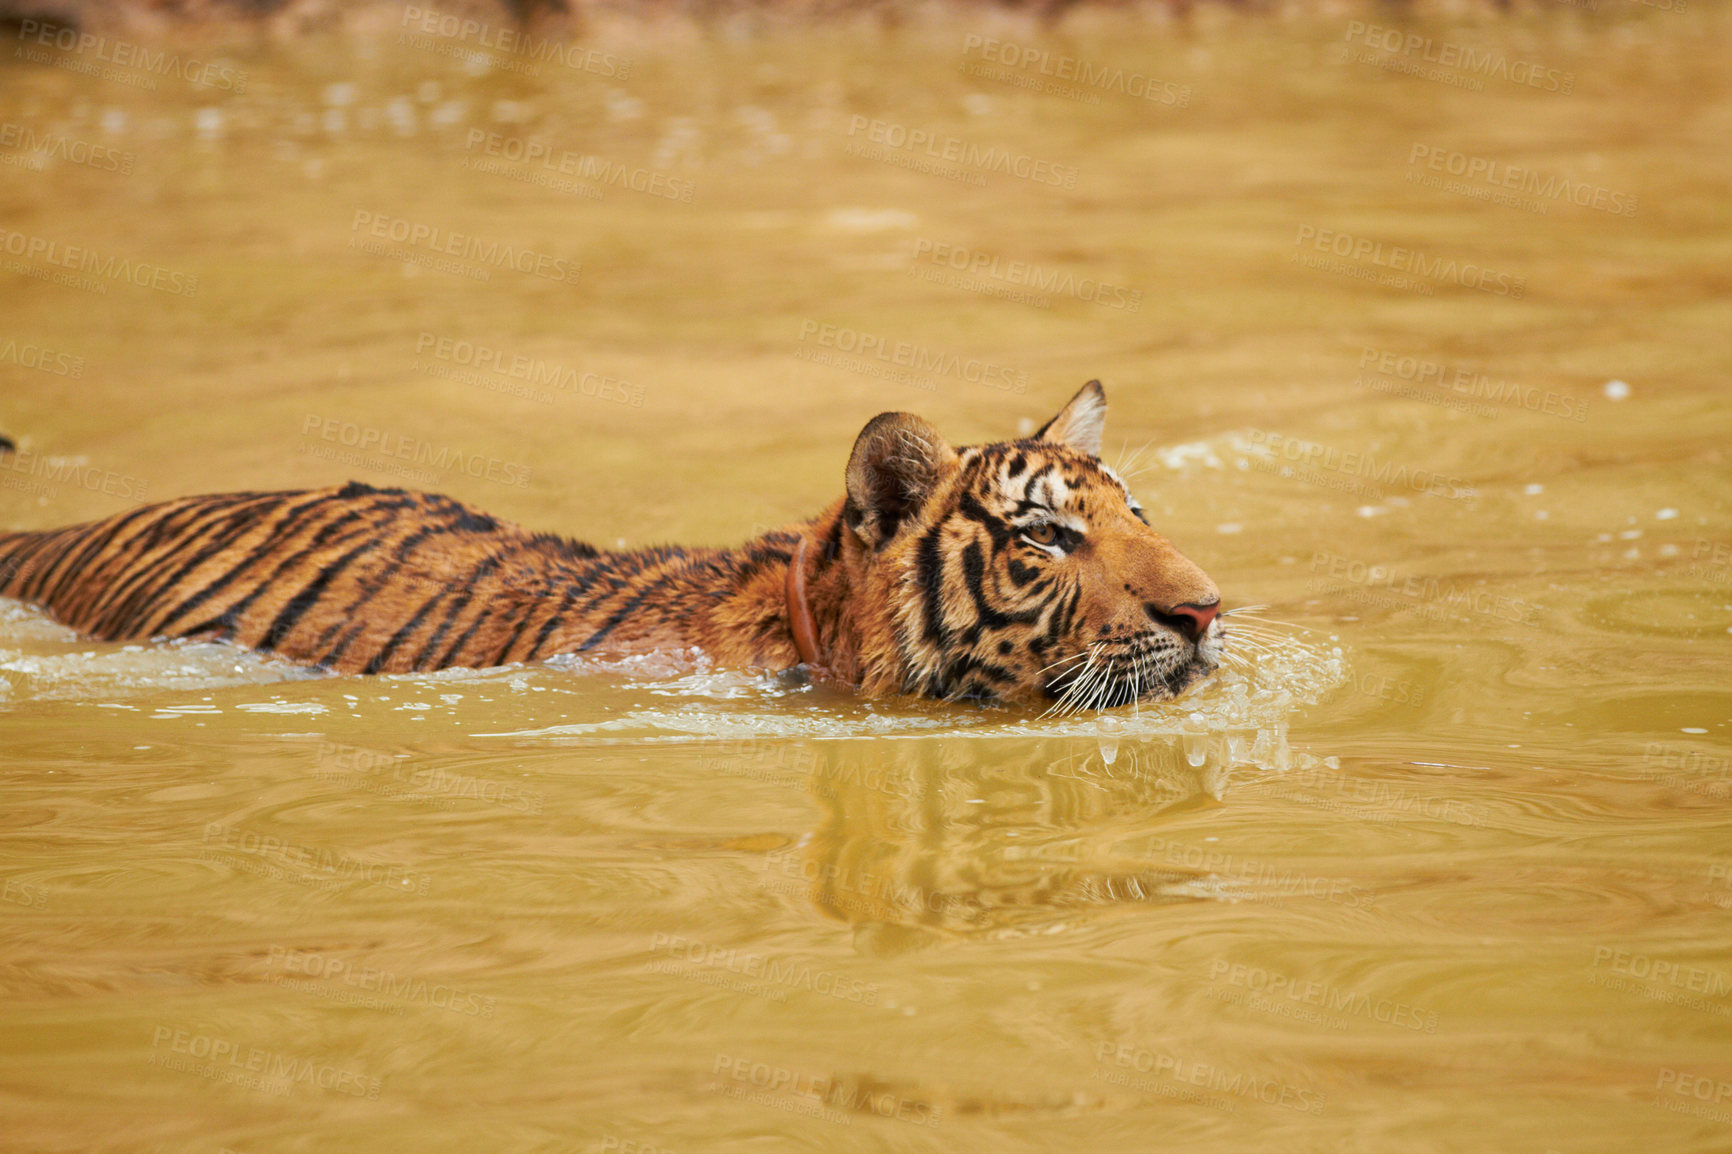 Buy stock photo One tiger walking through muddy waters. A focused Bengal tiger swimming in a water hole hunting its prey. Wildlife animal or predator cooling down in a dam. One indigenous Indian tiger in its habitat